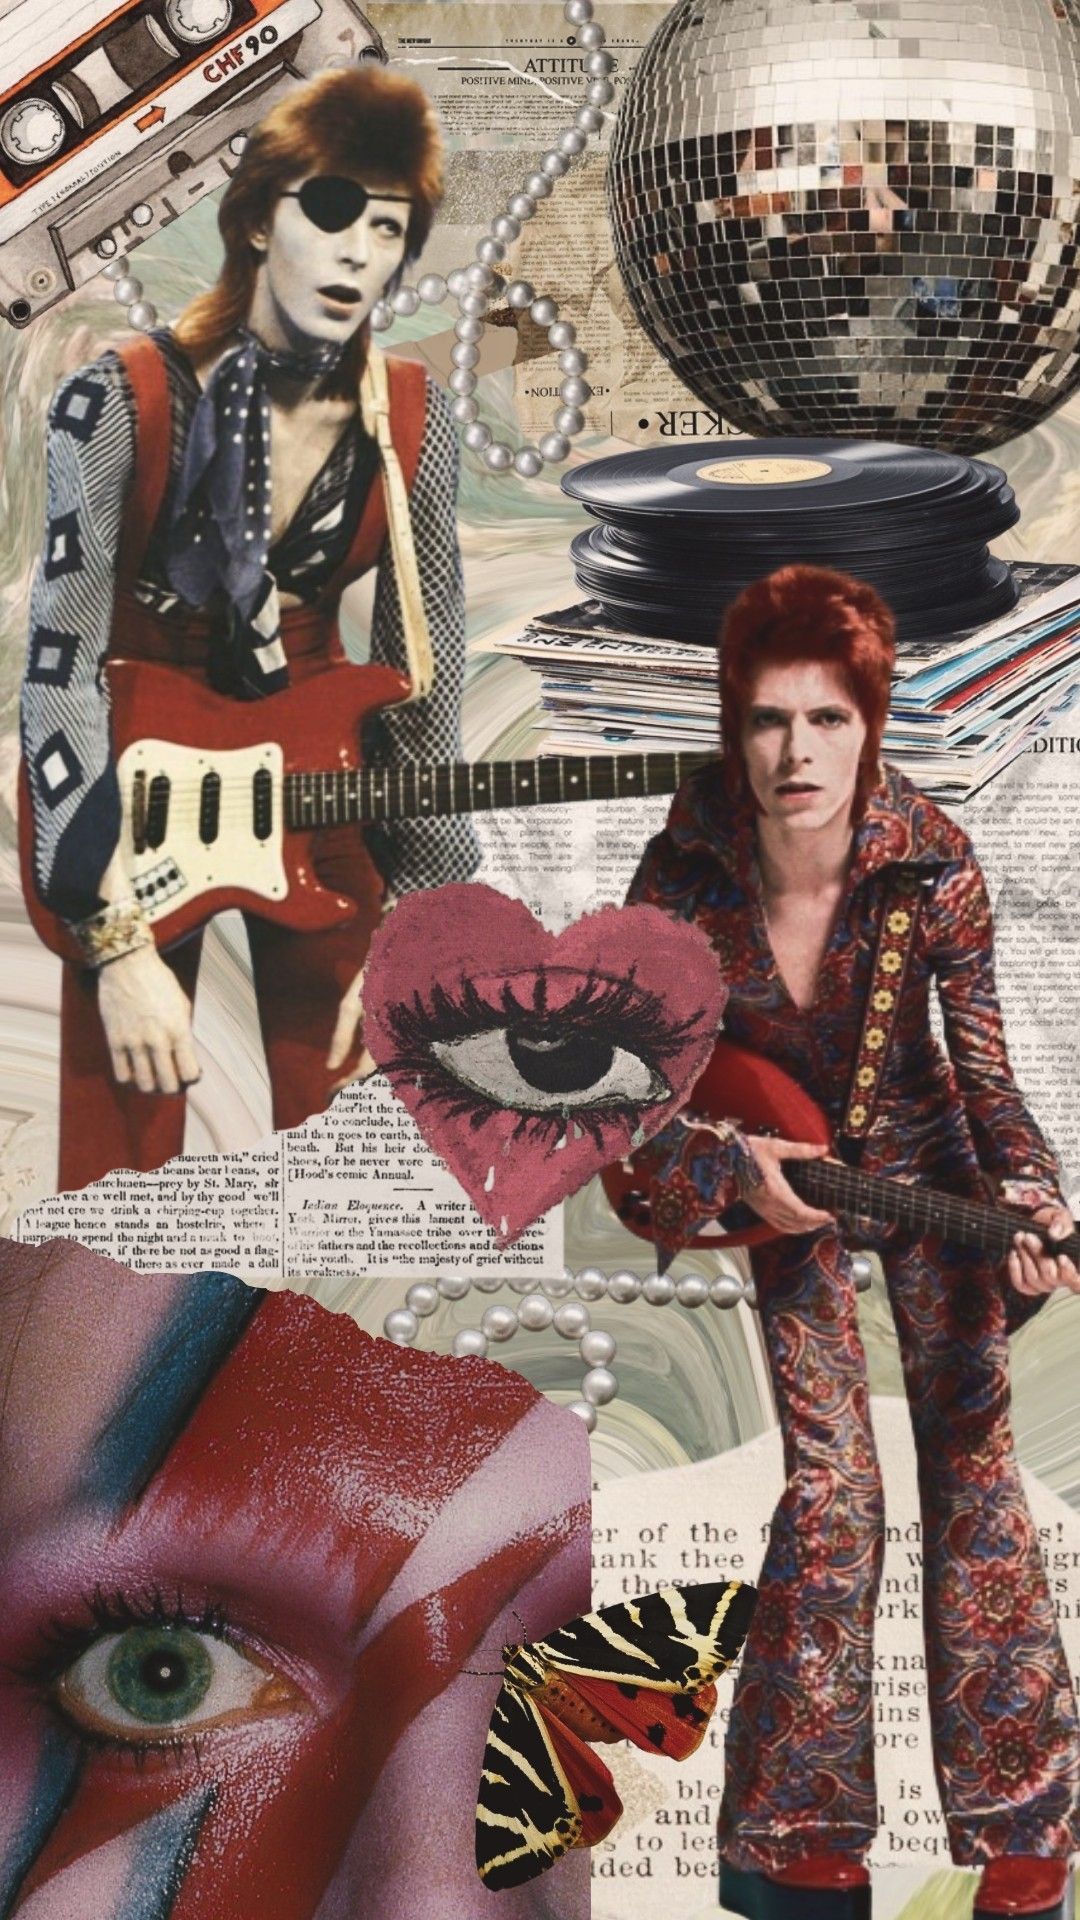 David Bowie Wallpaper. David bowie wallpaper, David bowie poster, Bowie starman